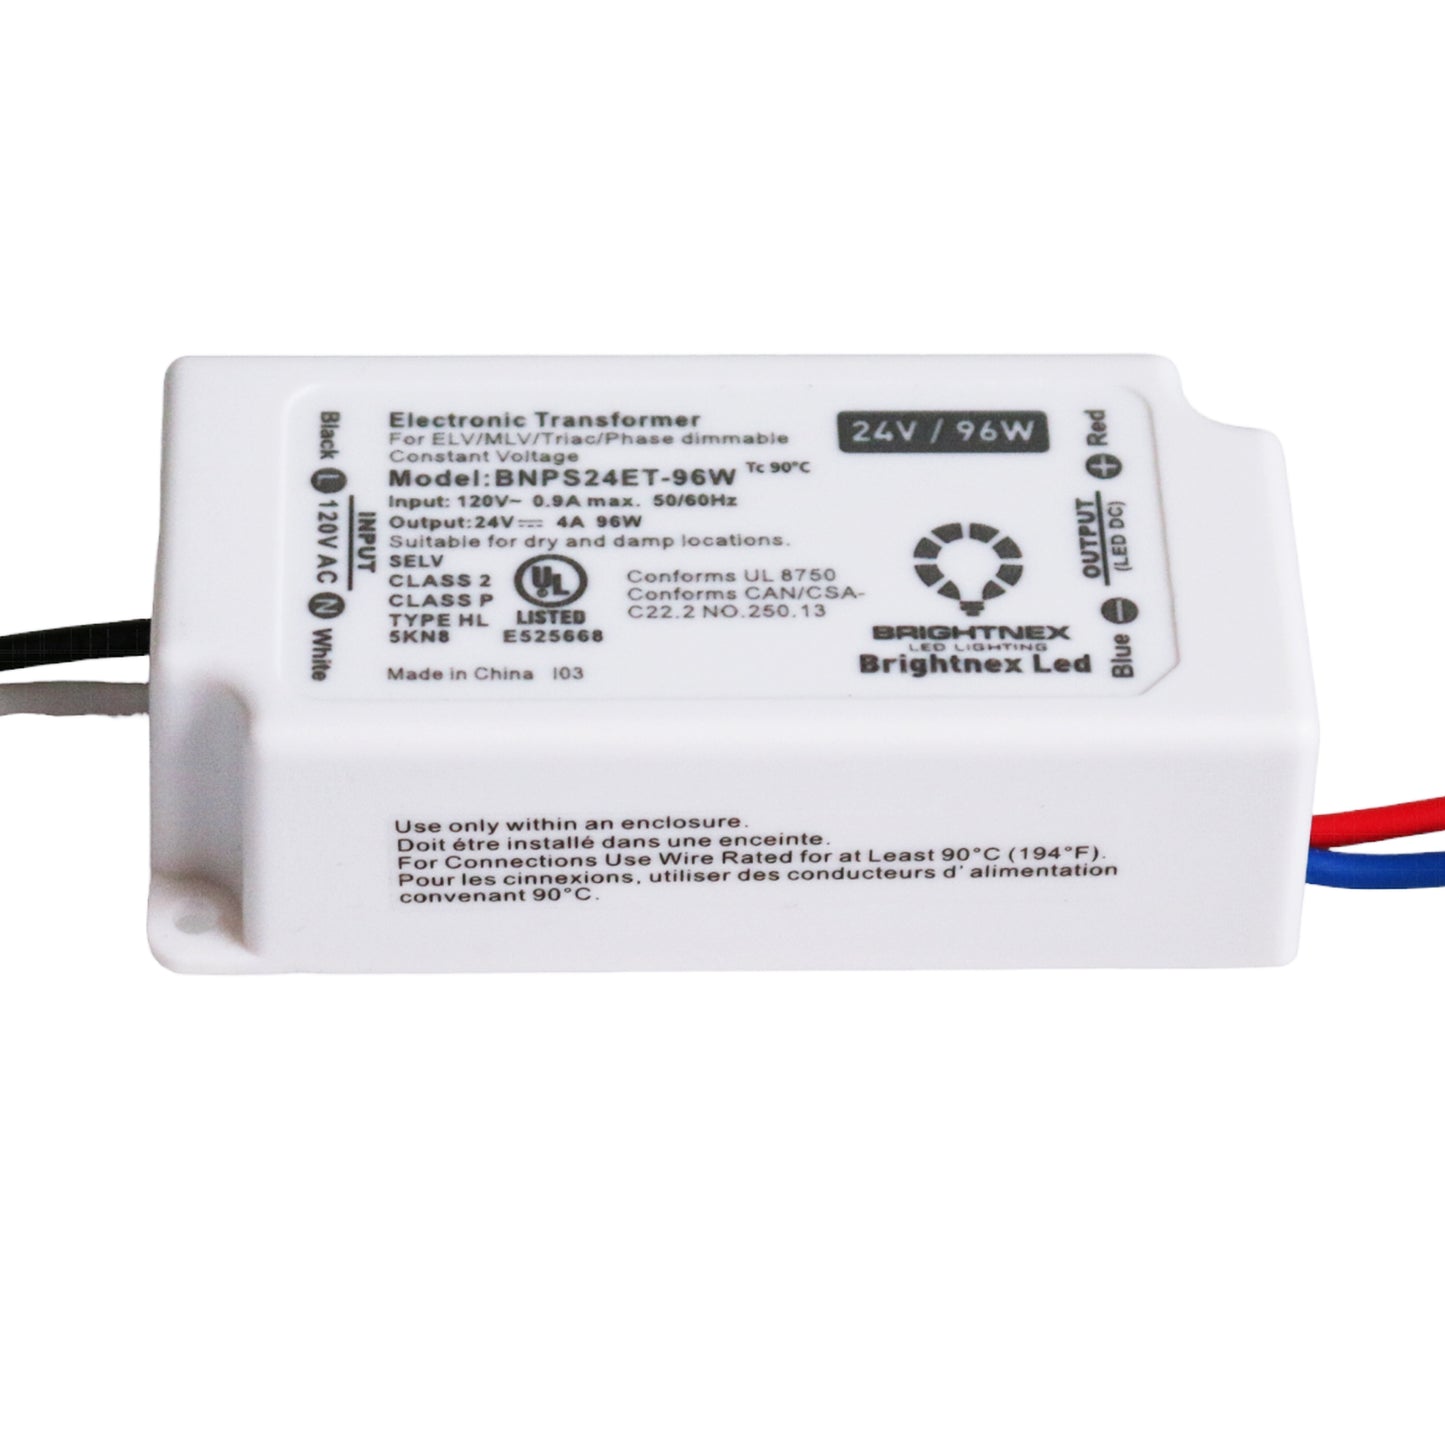 Small (Compact) Dimmable LED Driver (Dimmable LED Transformer), 24V, 96W